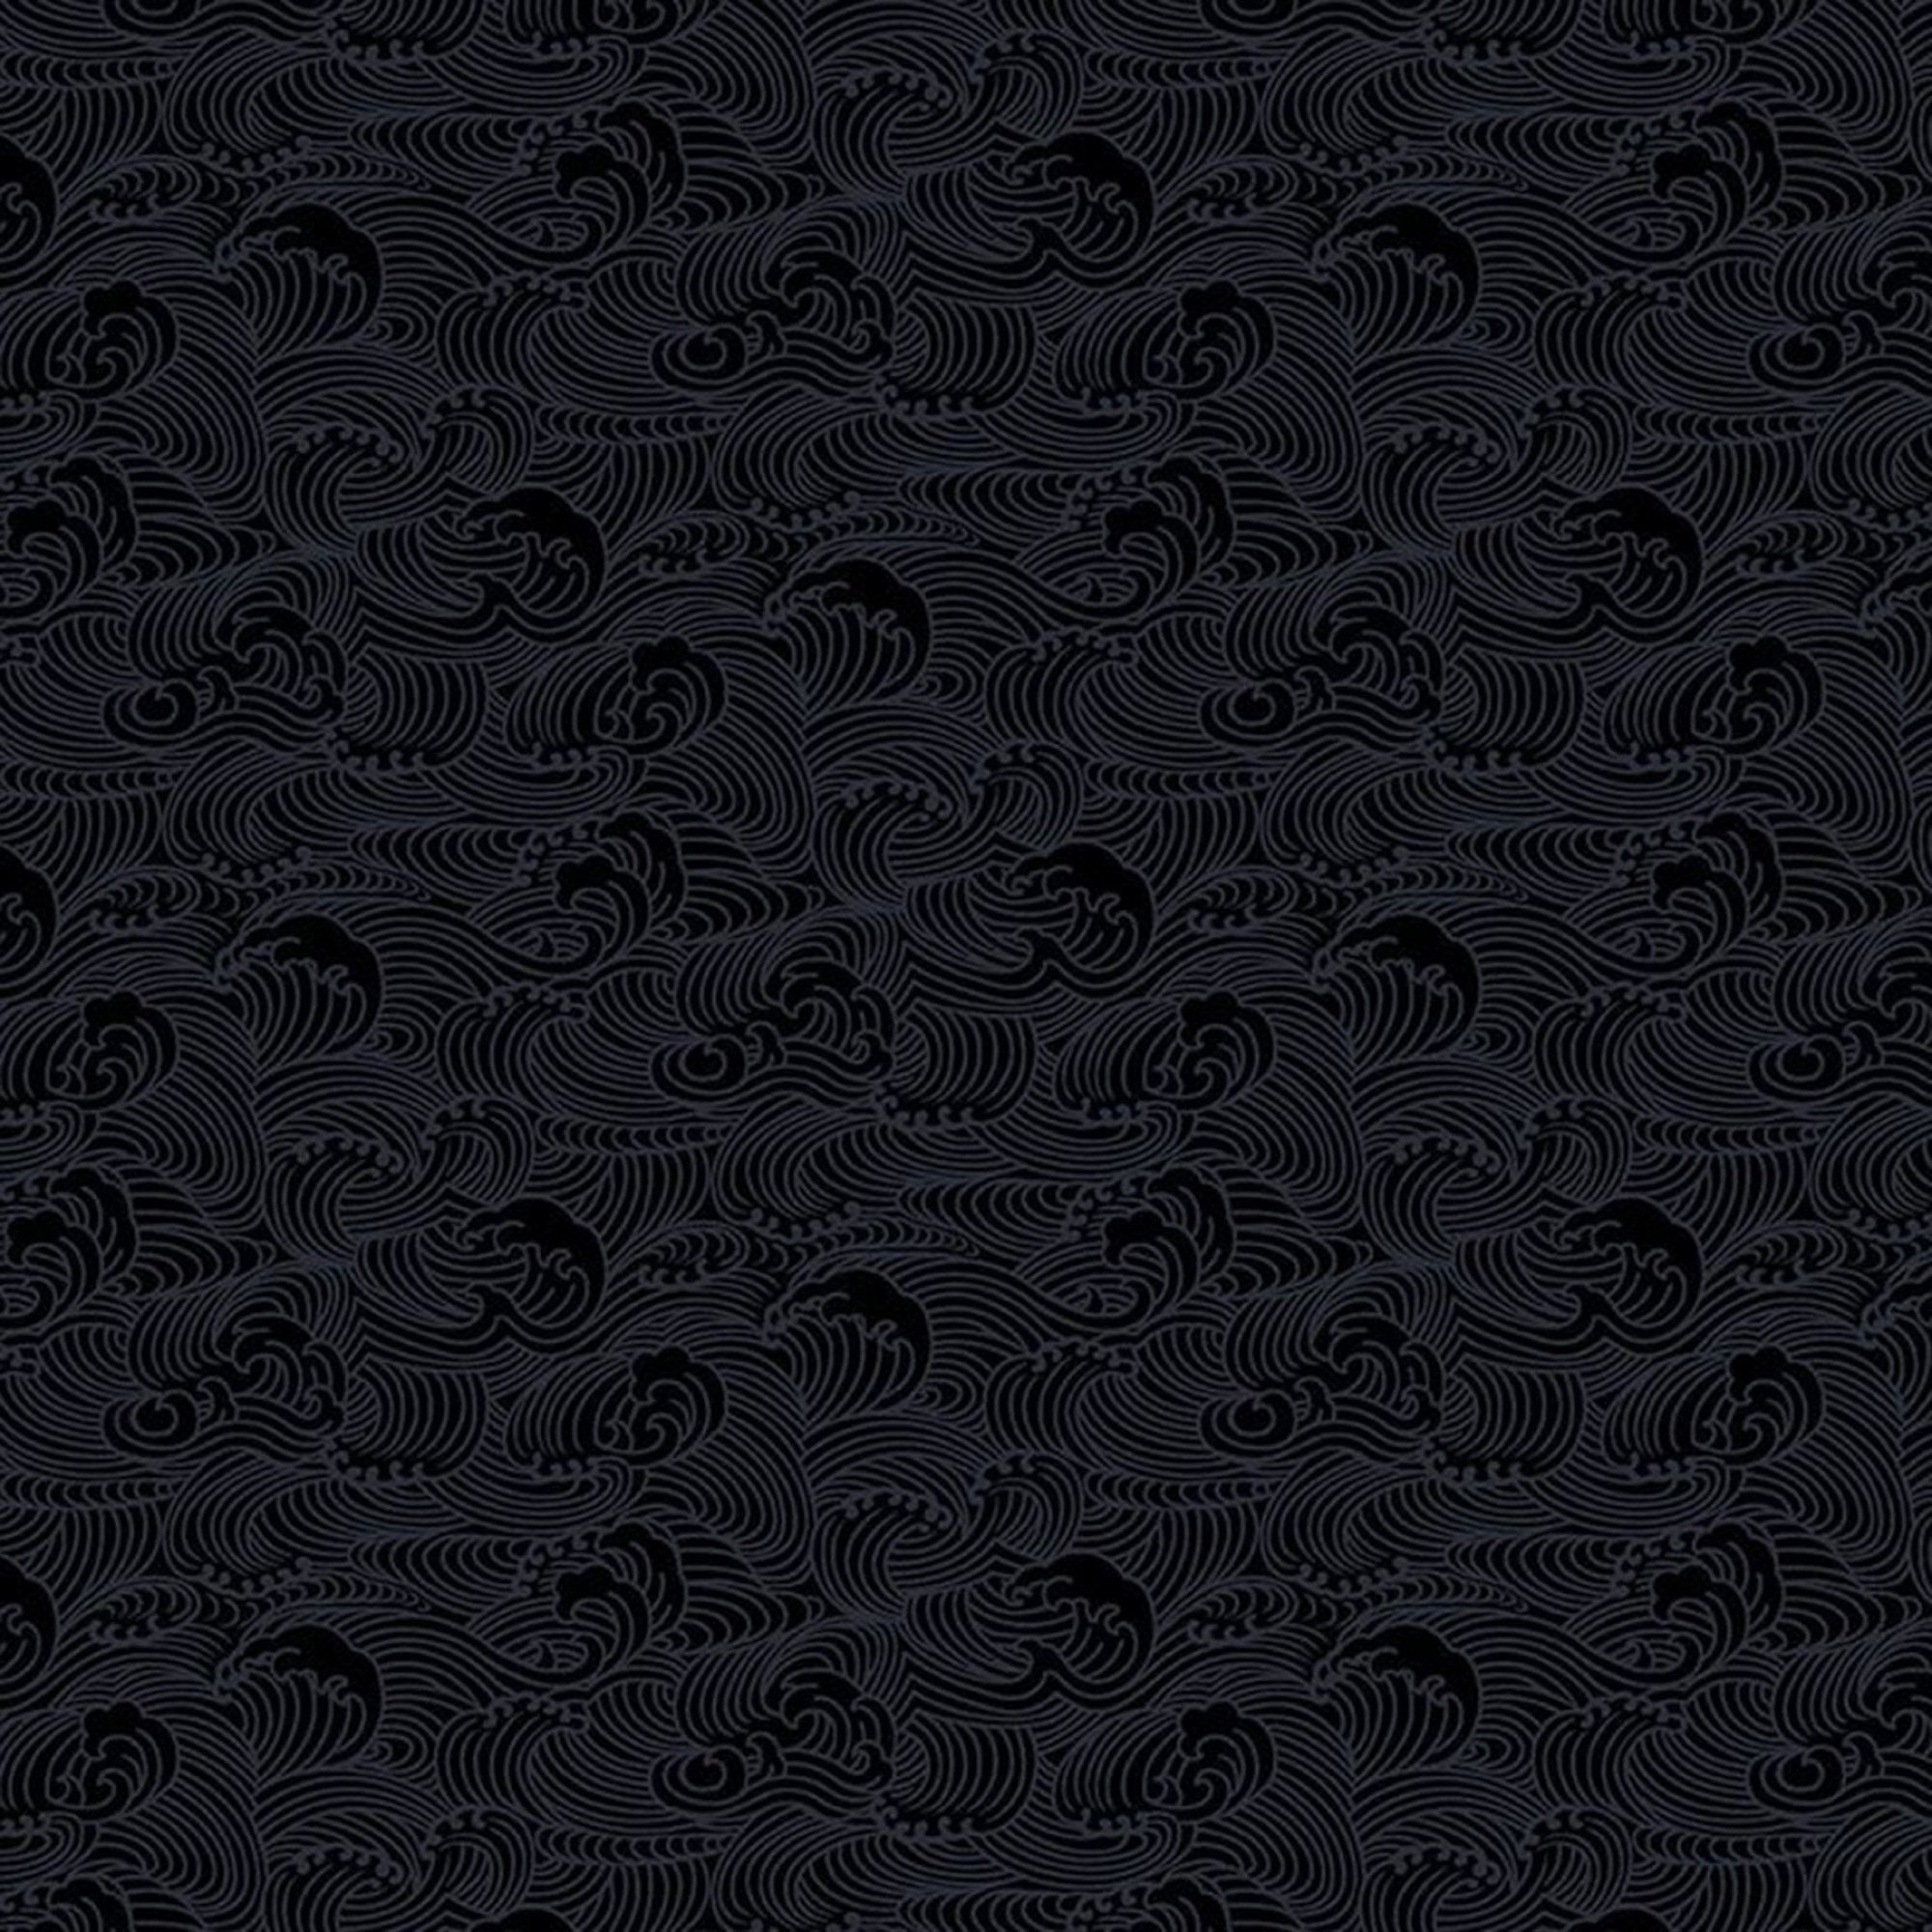 SALE Texture C610 Black by Riley Blake Designs - Sketched Tone-on-Tone  Irregular Grid - Quilting Cotton Fabric